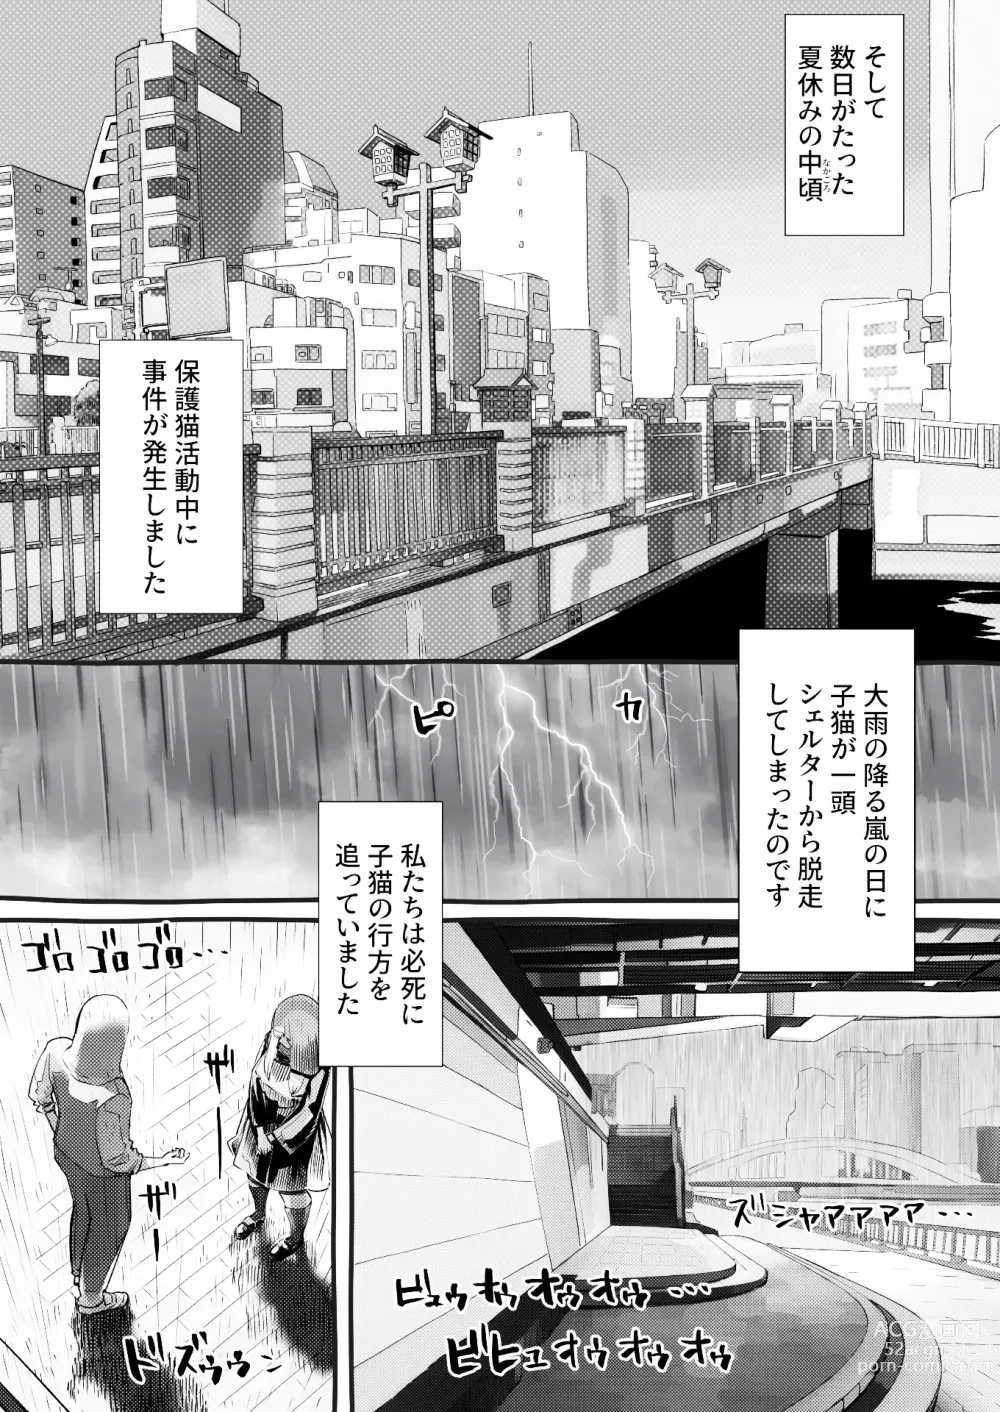 Page 24 of doujinshi 僕の彼女が他人棒で絶頂いたす